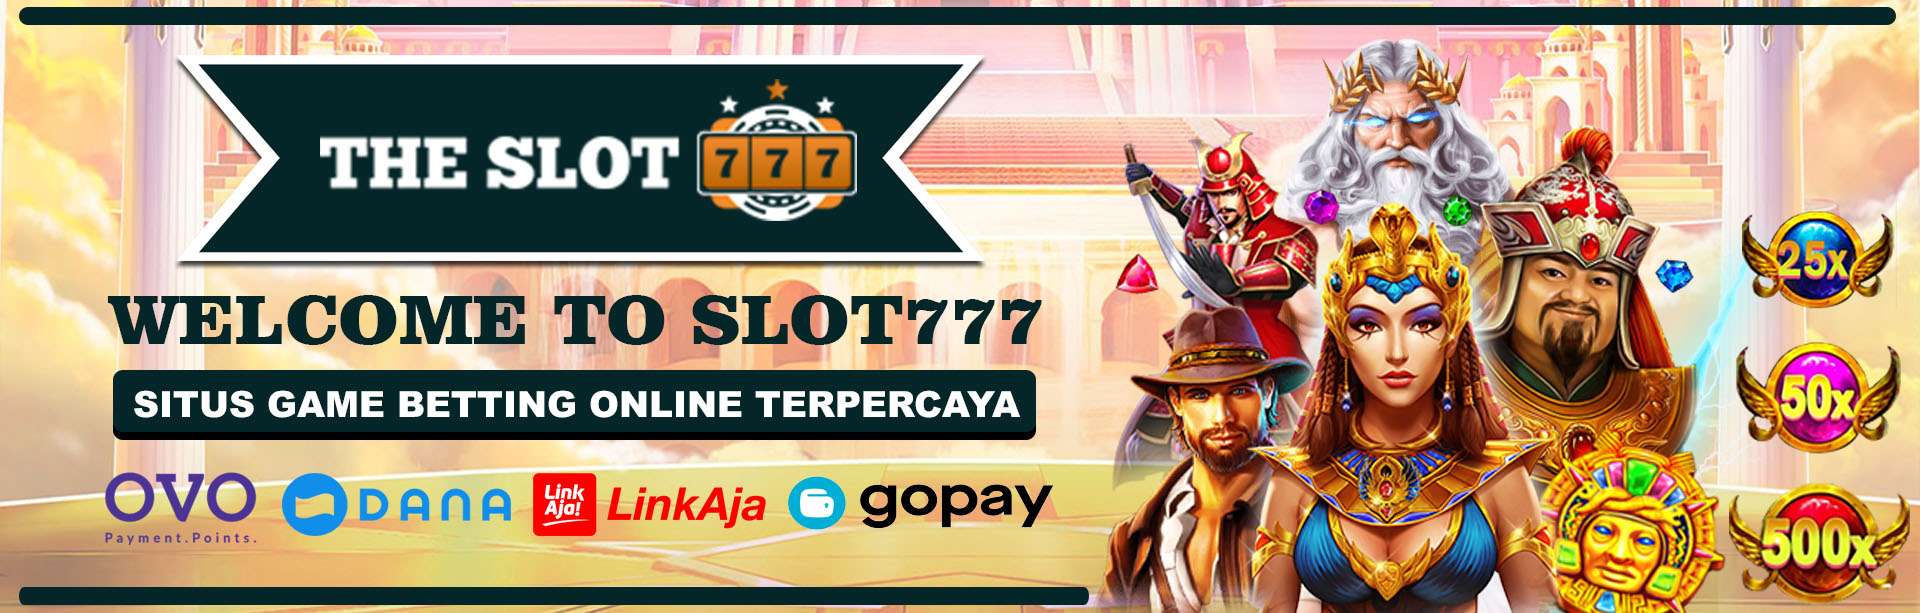 theslot777